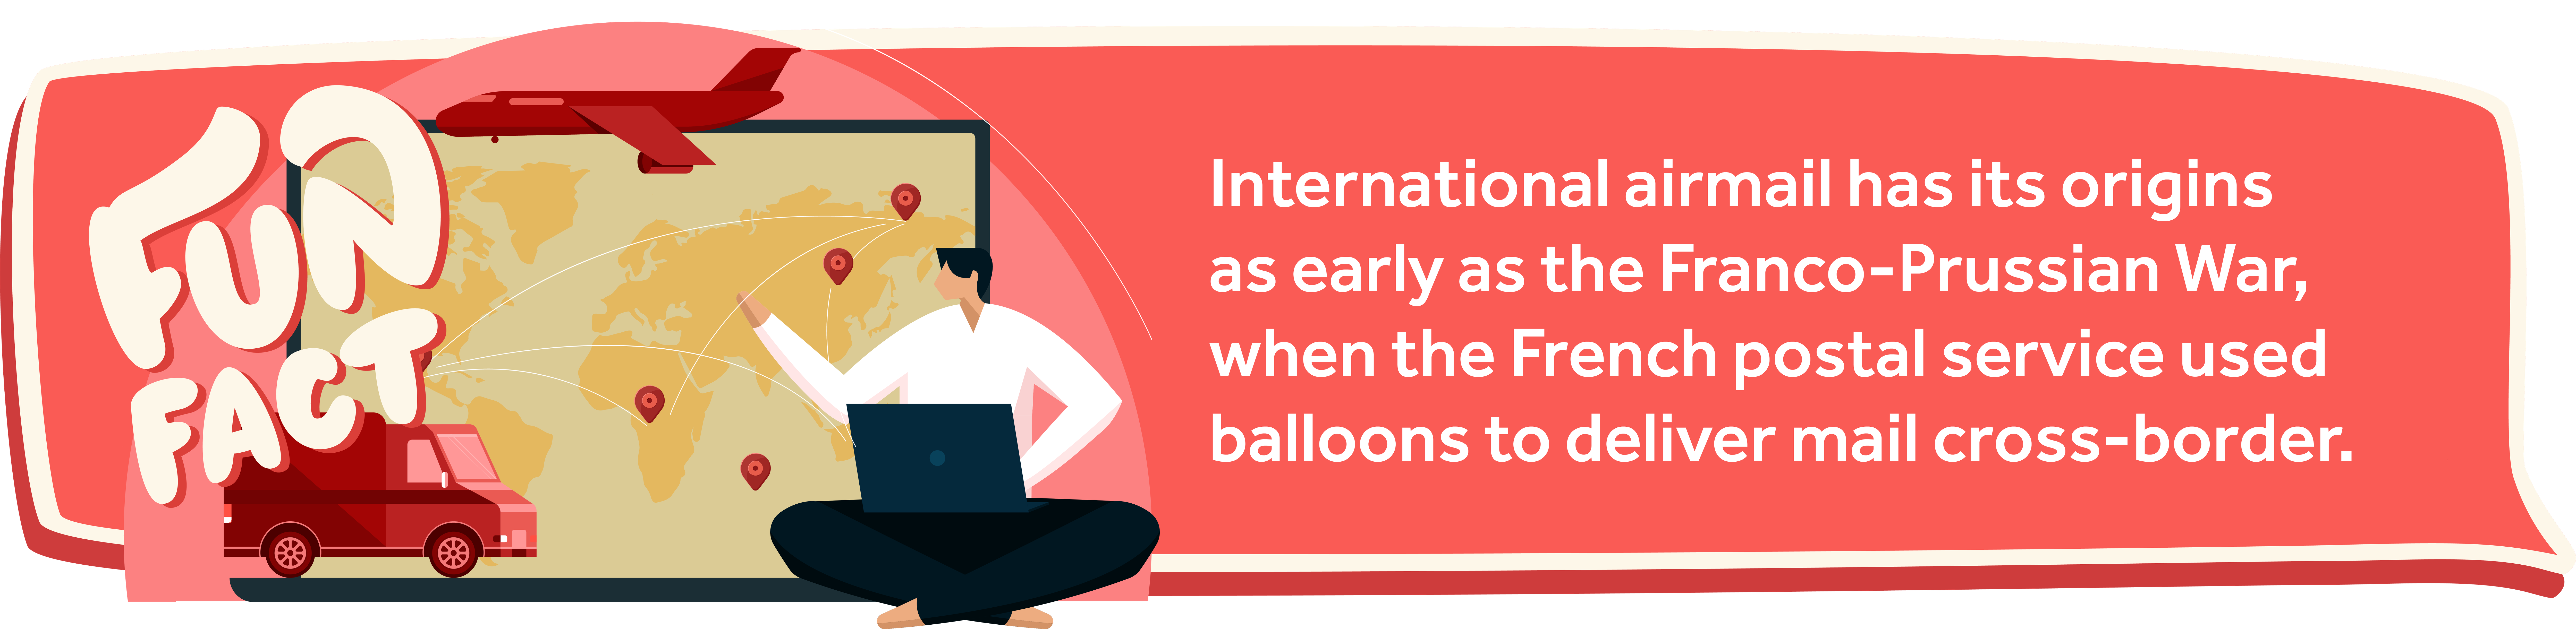 International airmail has its origins as early as the Franco-Prussian War, when the French postal service used balloons to deliver mail cross-border.